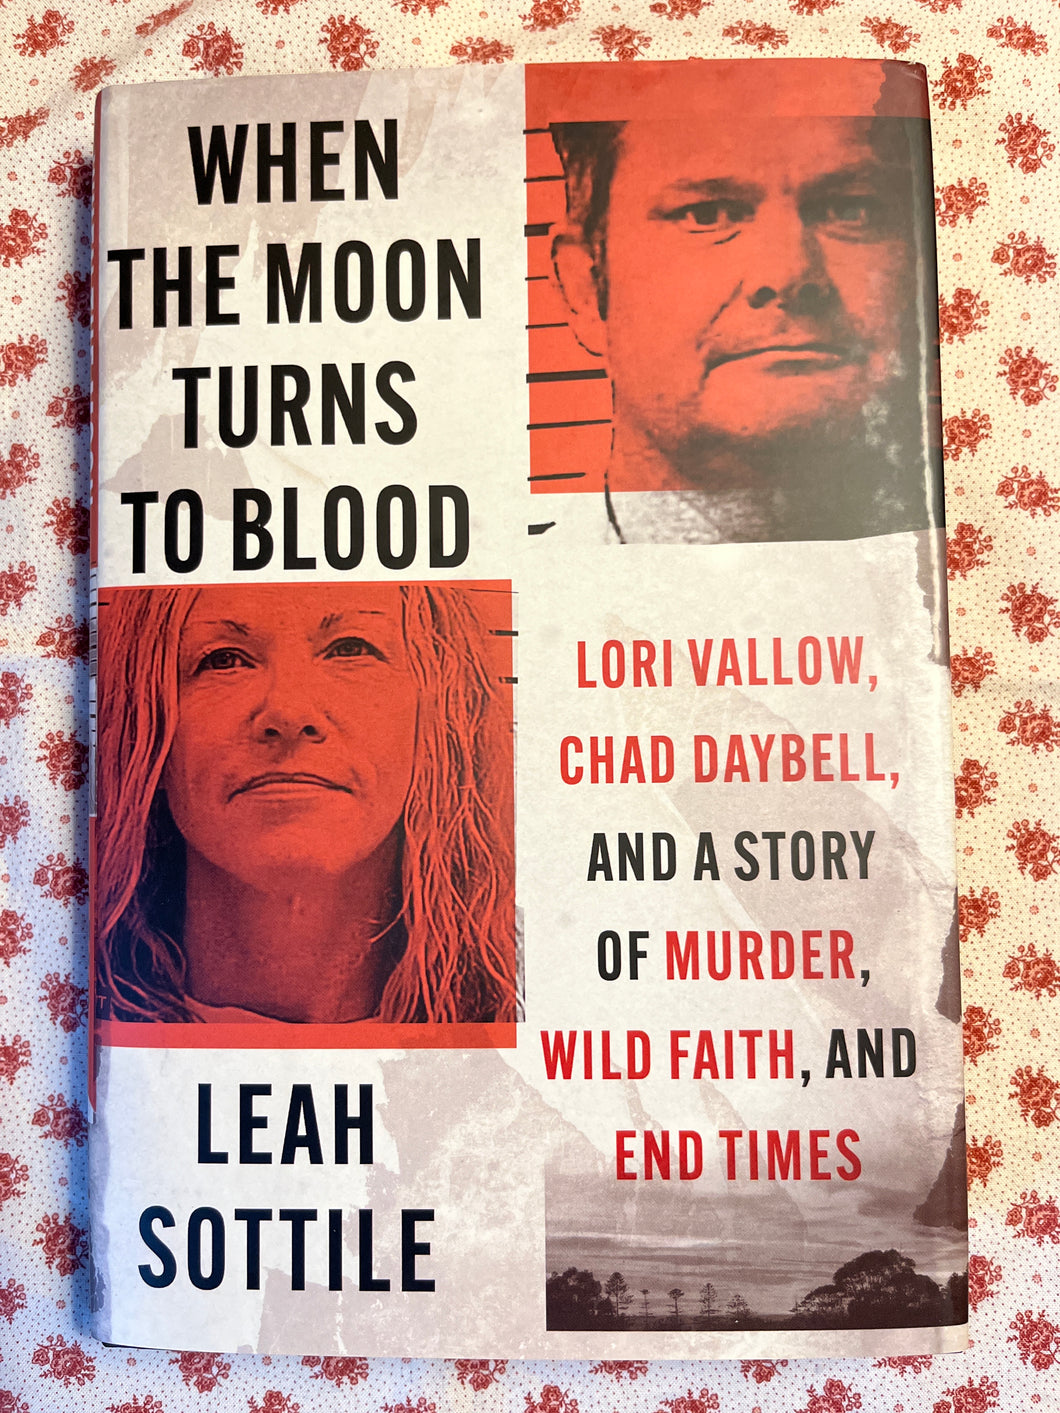 When The Moon Turns To Blood: Lori Vallow, Chad Daybell, And A Story Of Murder, Wild Faith, And End Times